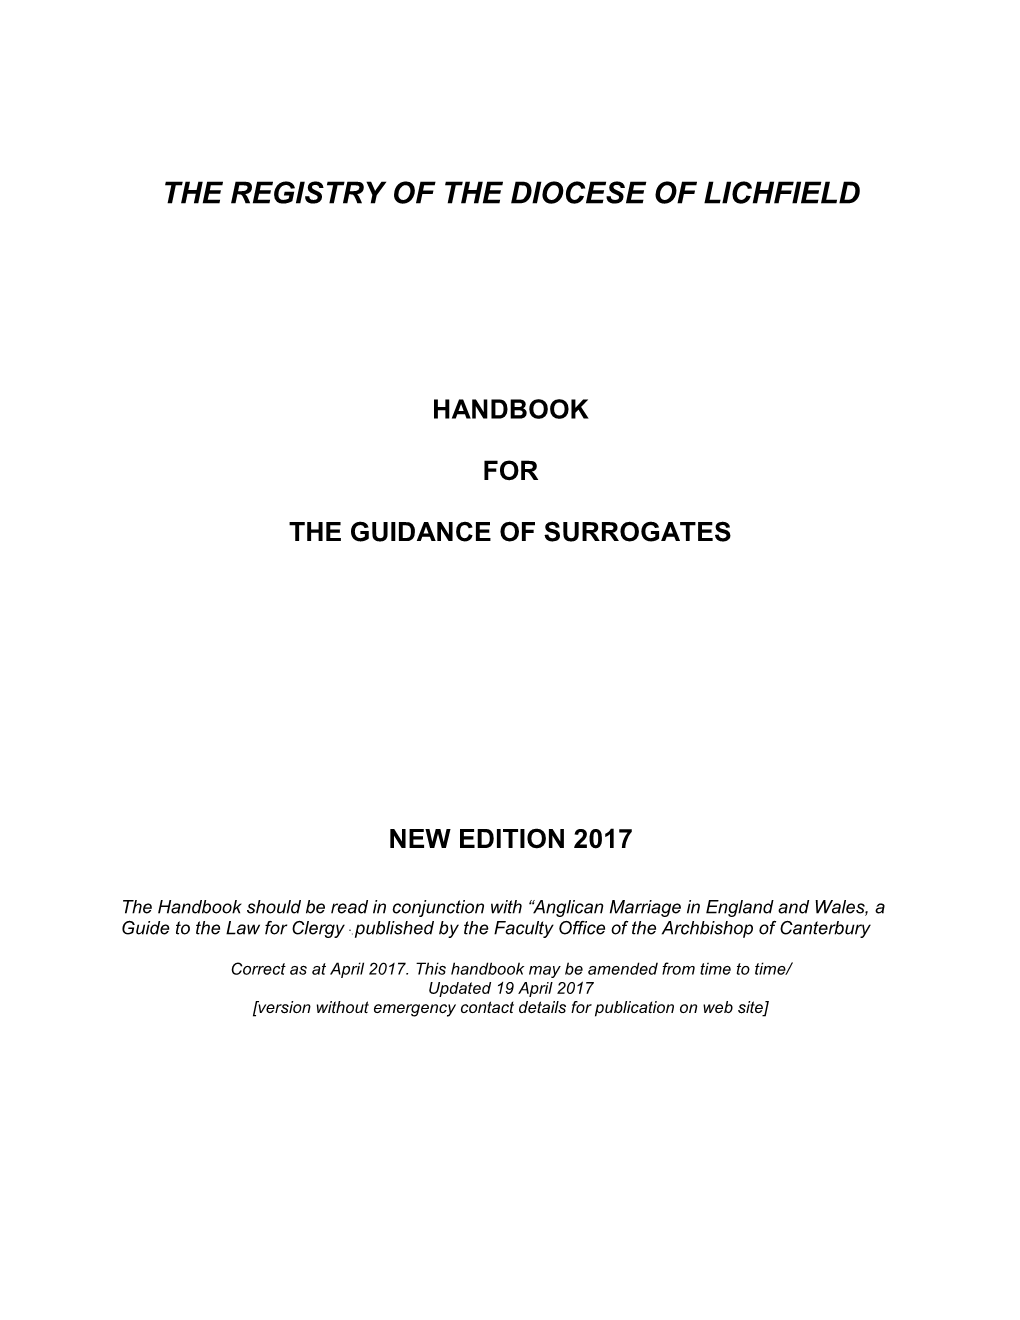 The Registry of the Diocese of Lichfield